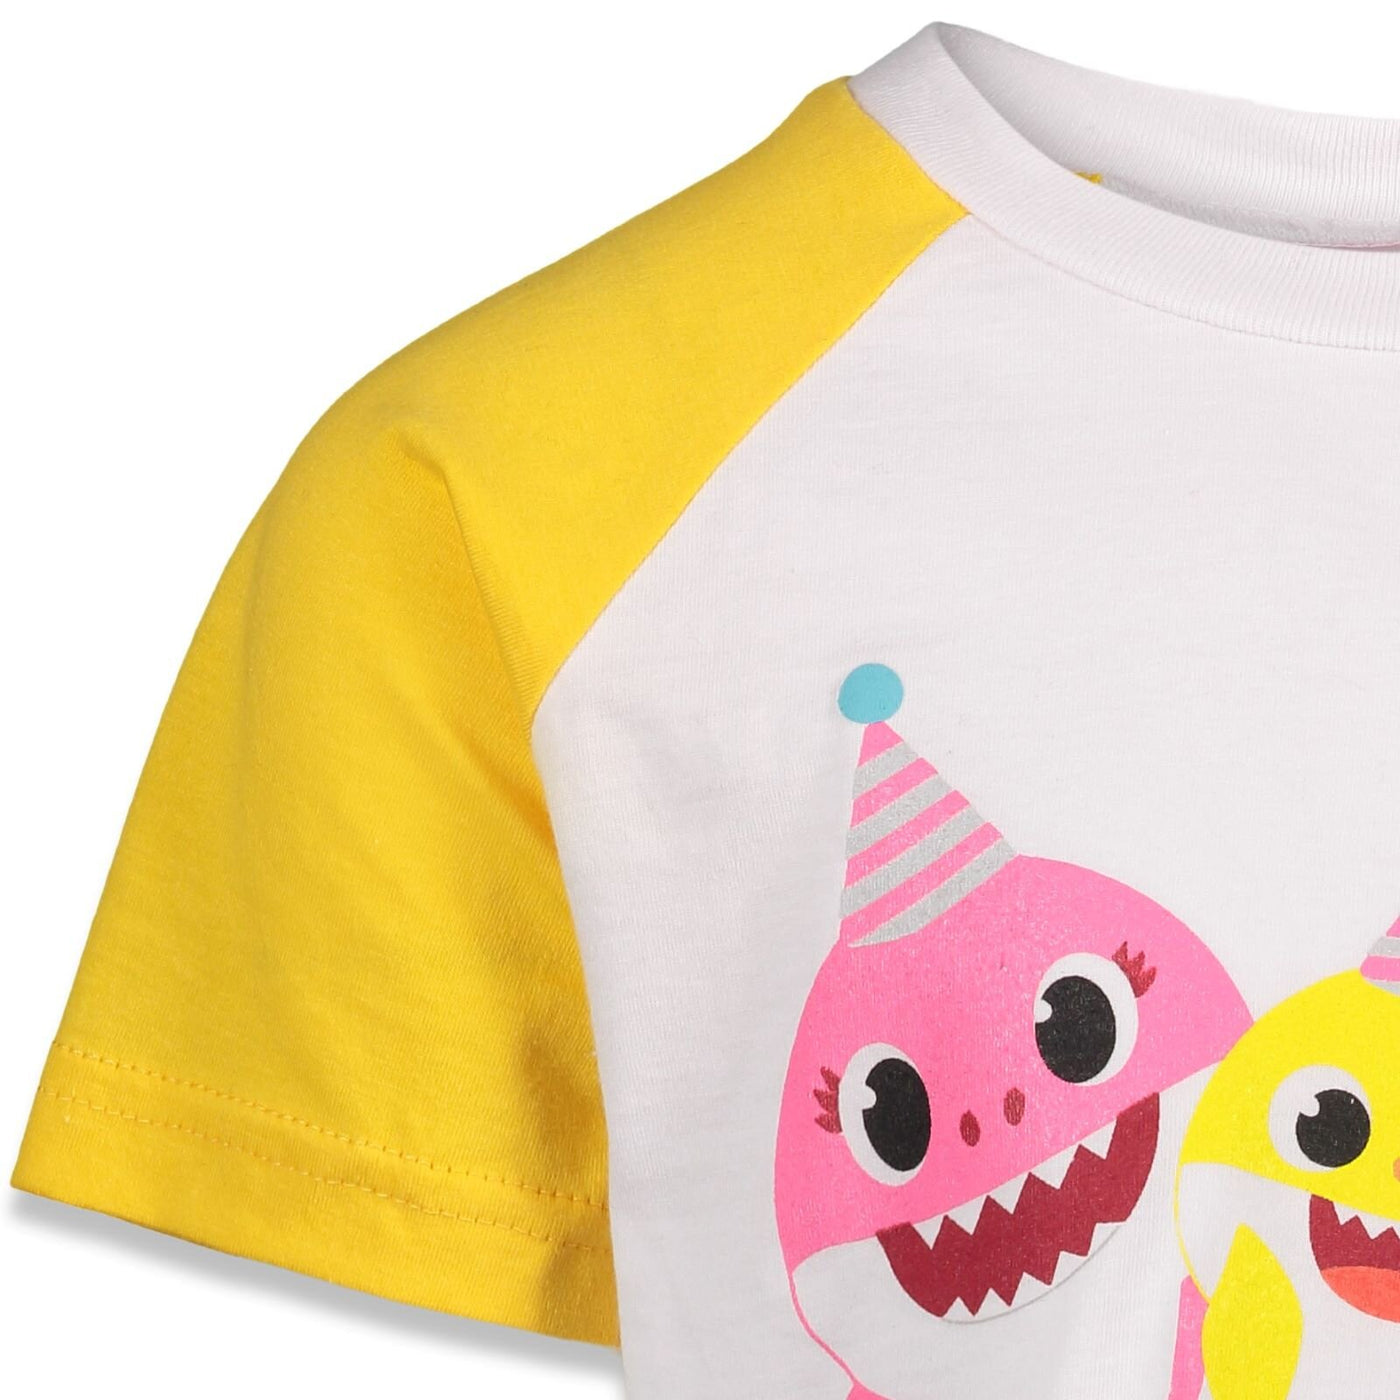 Pinkfong Baby Shark T-Shirt and French Terry Shorts Outfit Set